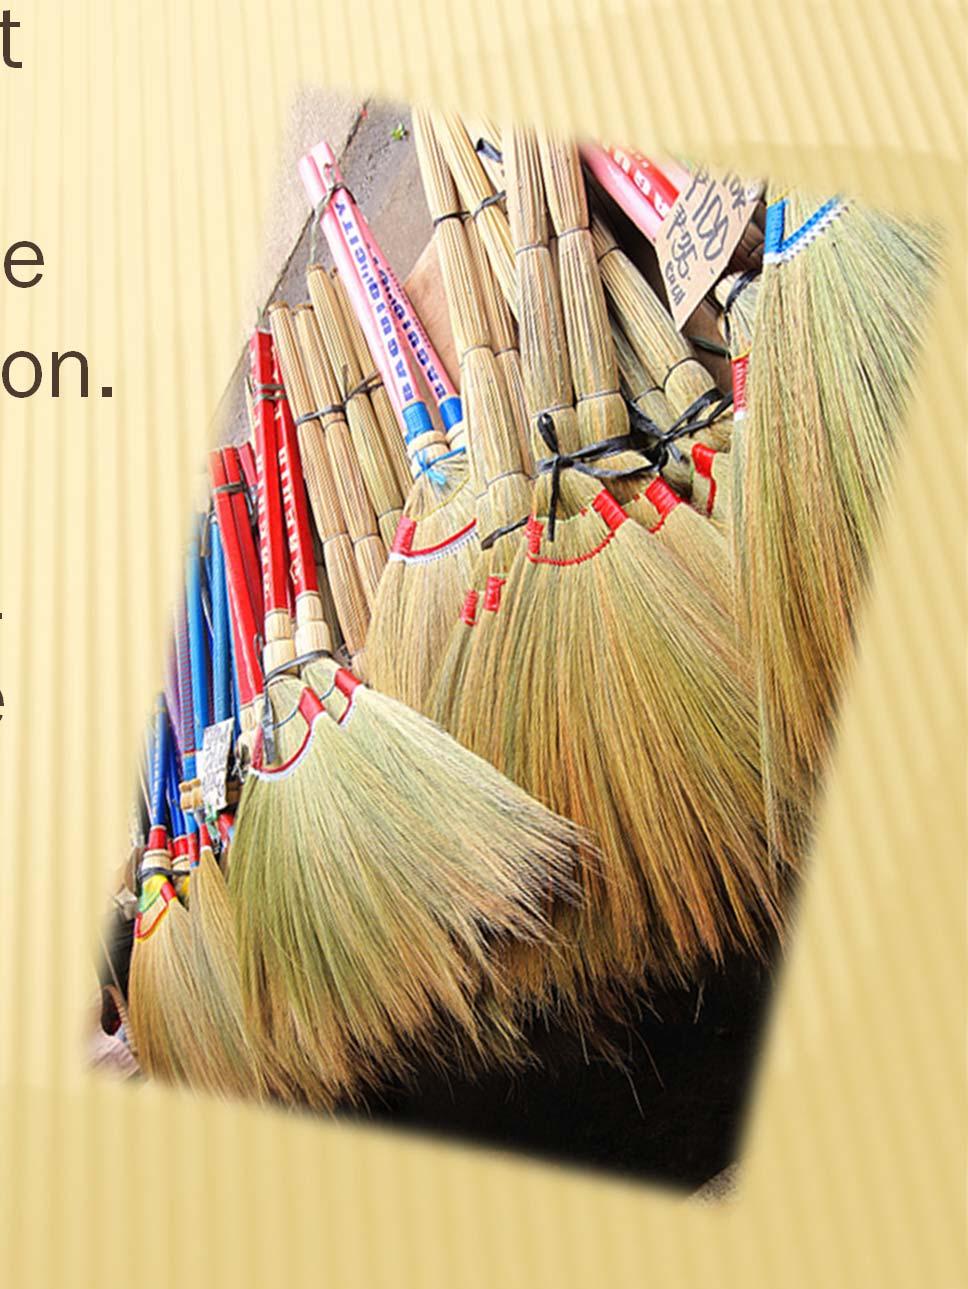 MARKETING CONSIDERATIONS Brooms are sold in retail at P40/pc and wholesale at P35/pc. Price may increase depending on the decoration.